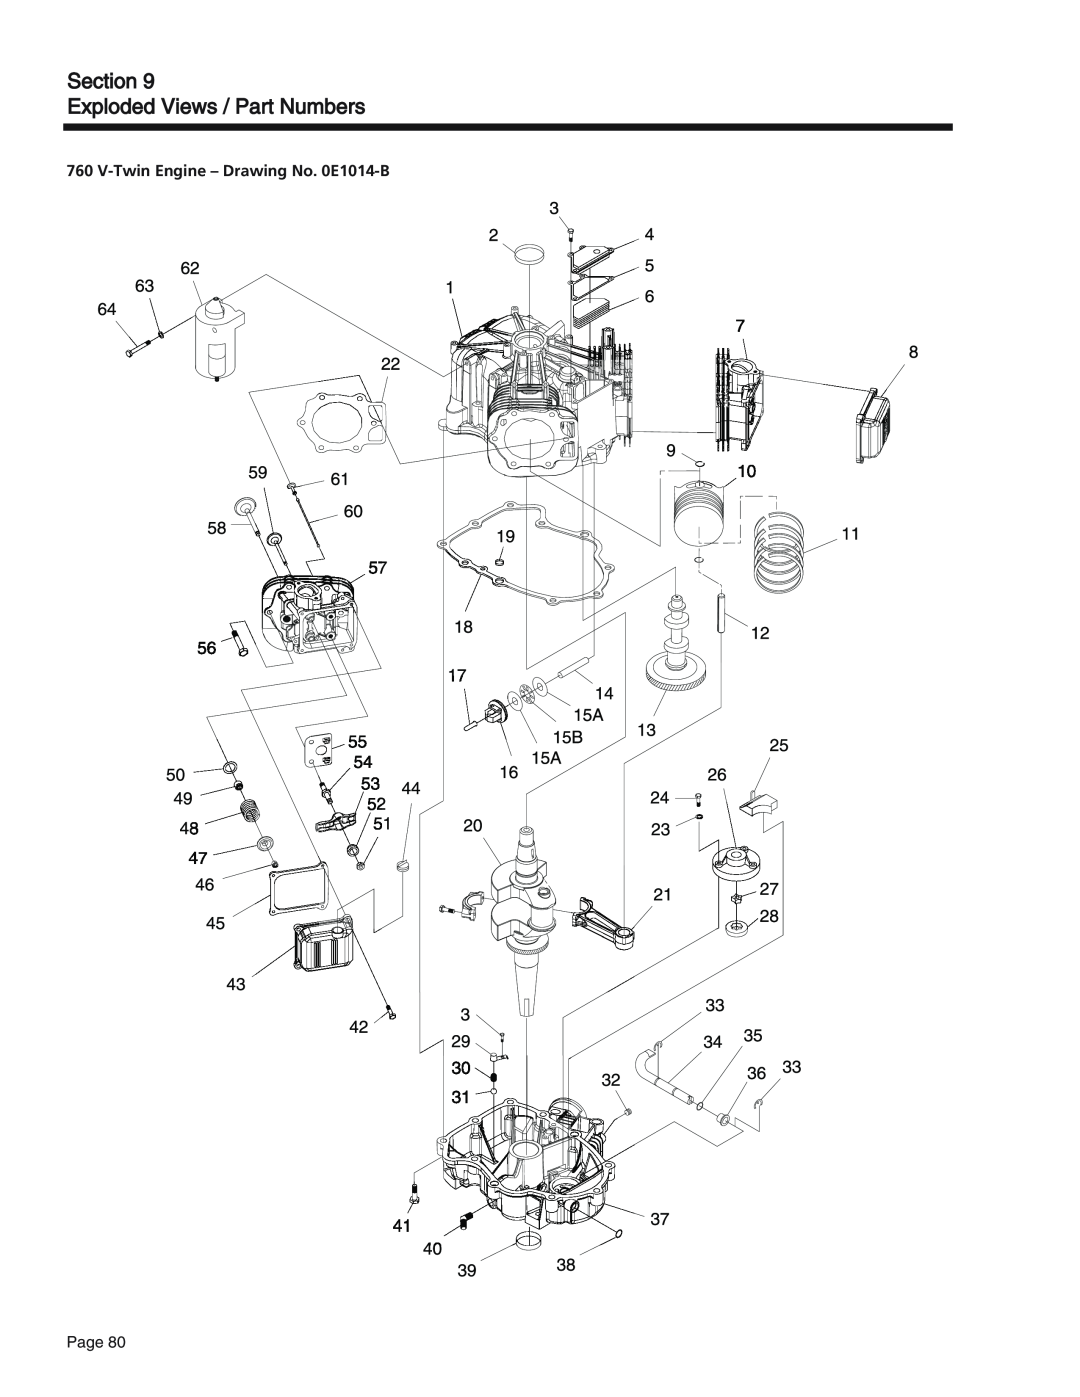 Generac Power Systems 75, 55, 65 manual Section Exploded Views / Part Numbers, V-TwinEngine – Drawing No. 0E1014-B 